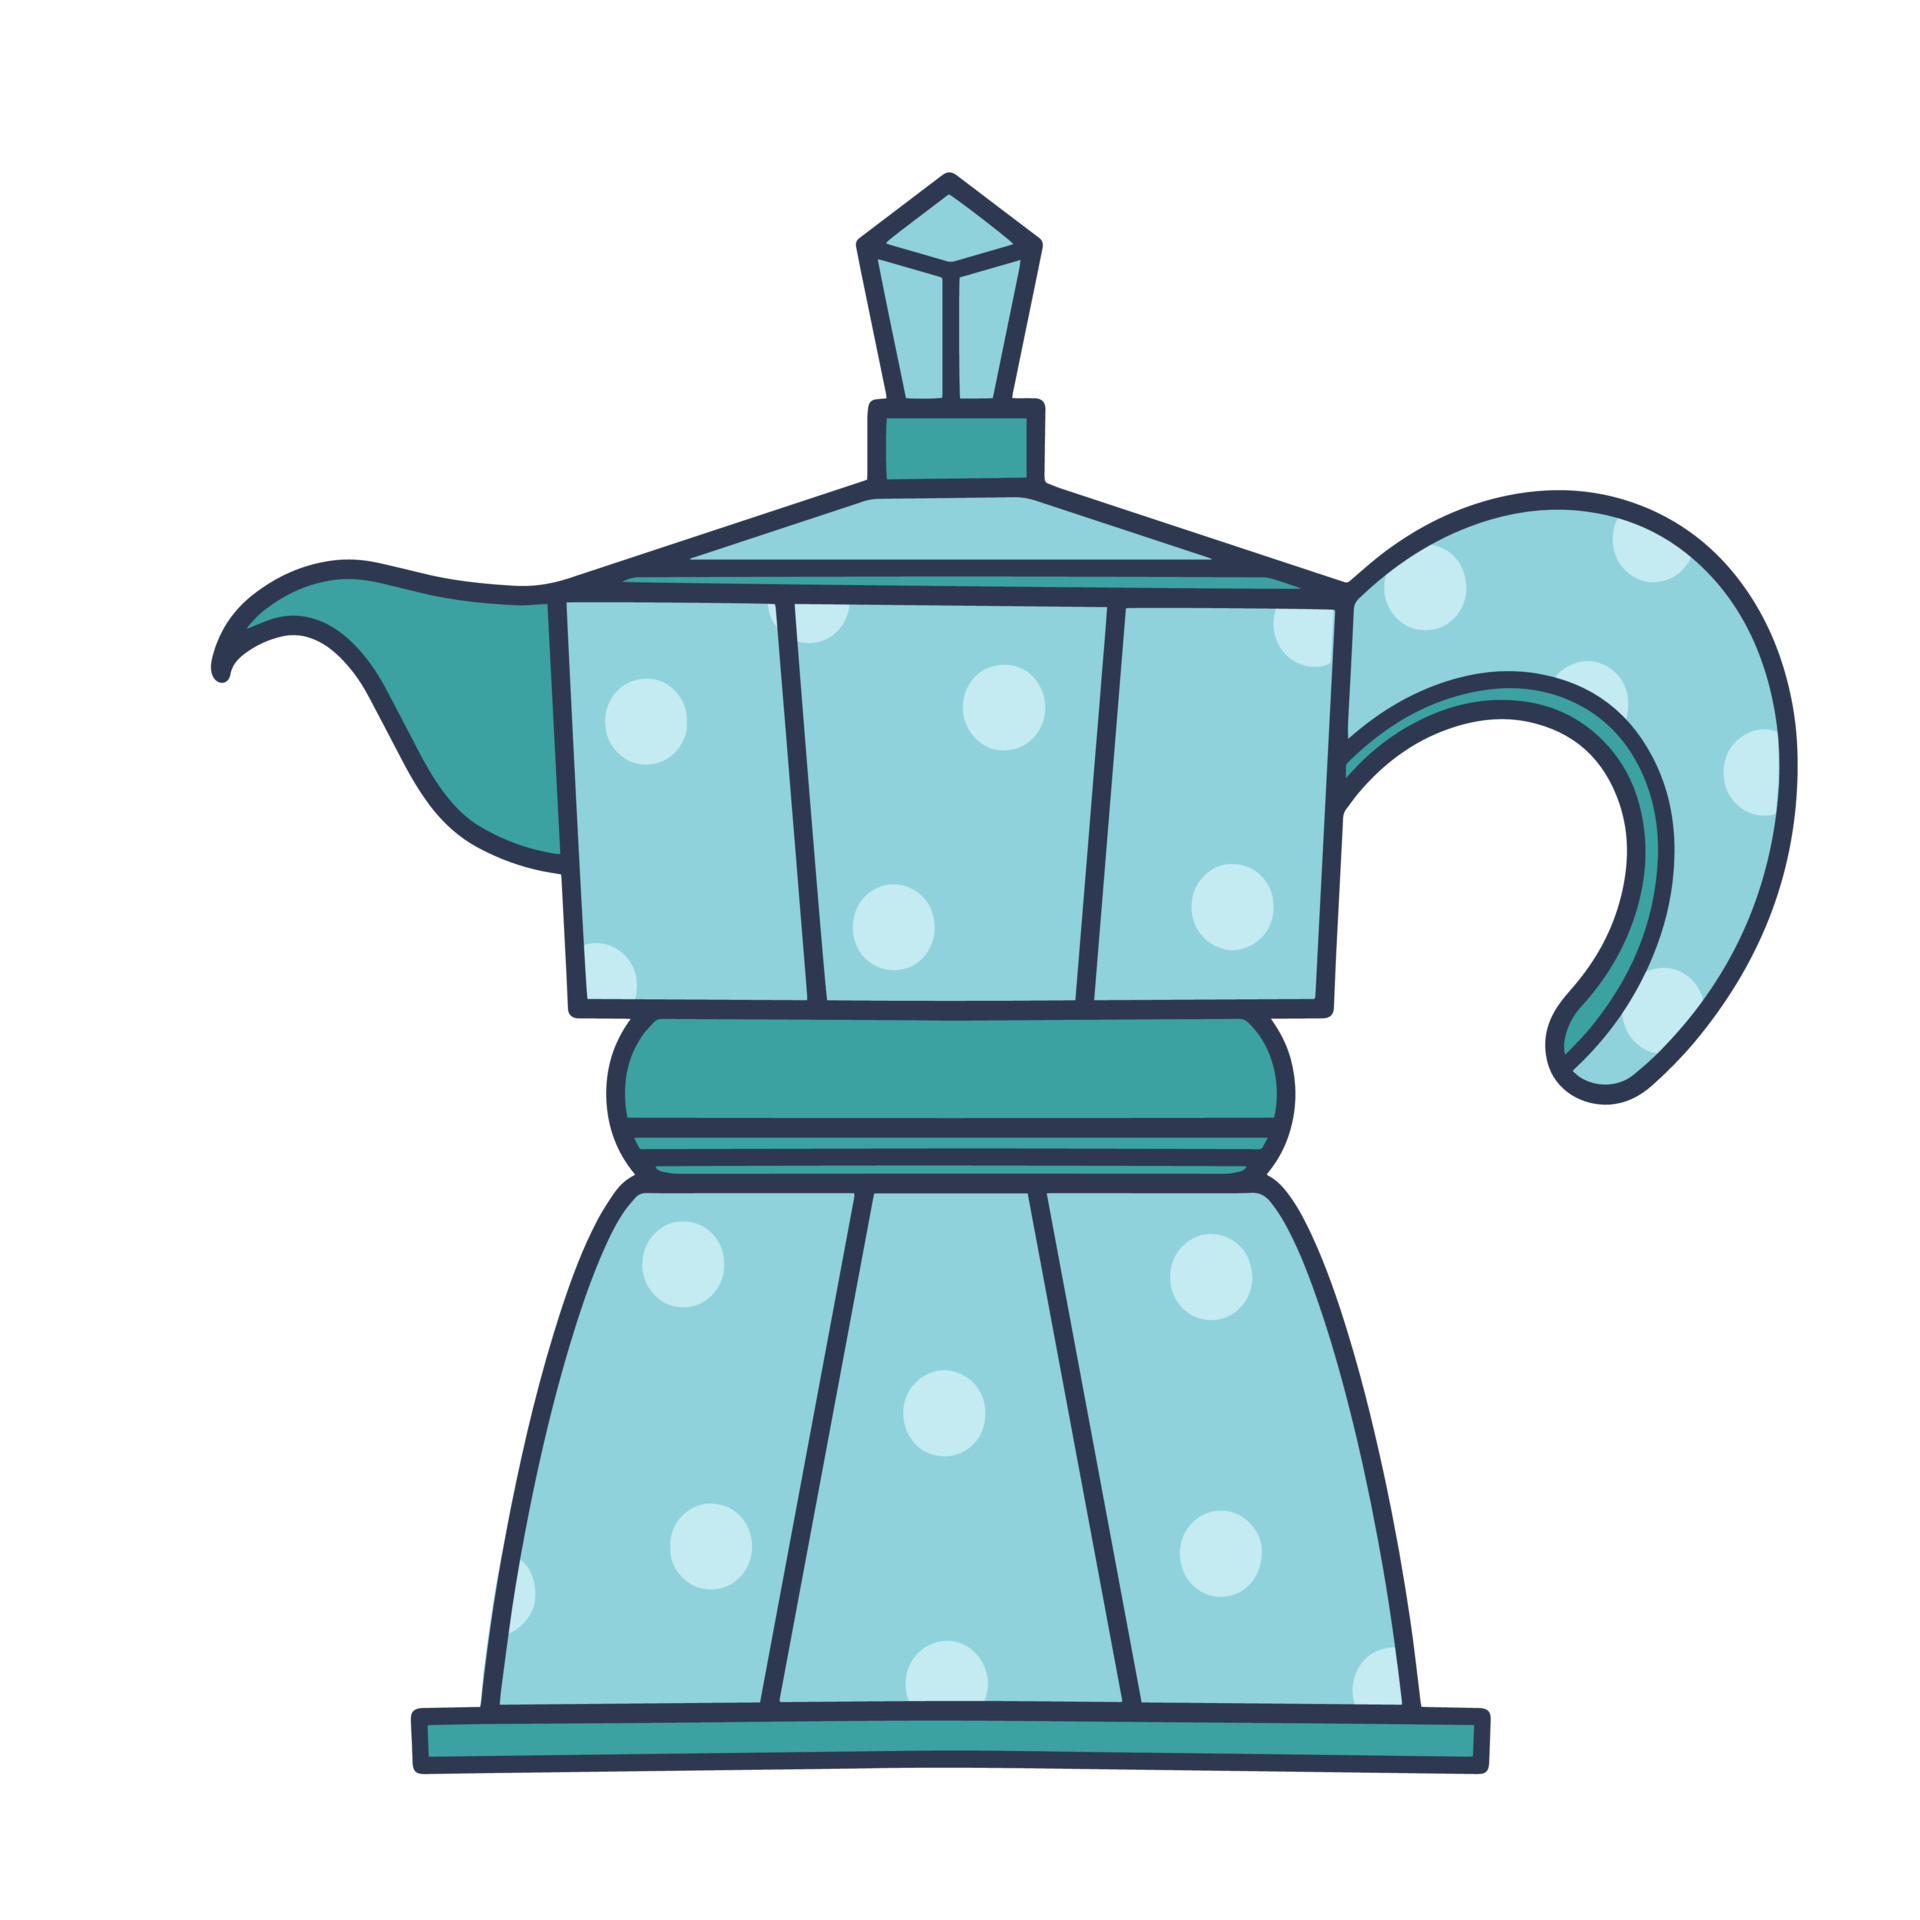 Geyser coffee maker polka dot vector icon. Hand drawn illustration isolated  on white background. Metal Italian moka pot for brewing drinks - espresso,  cappuccino. Flat cartoon clipart, color doodle. 5267026 Vector Art